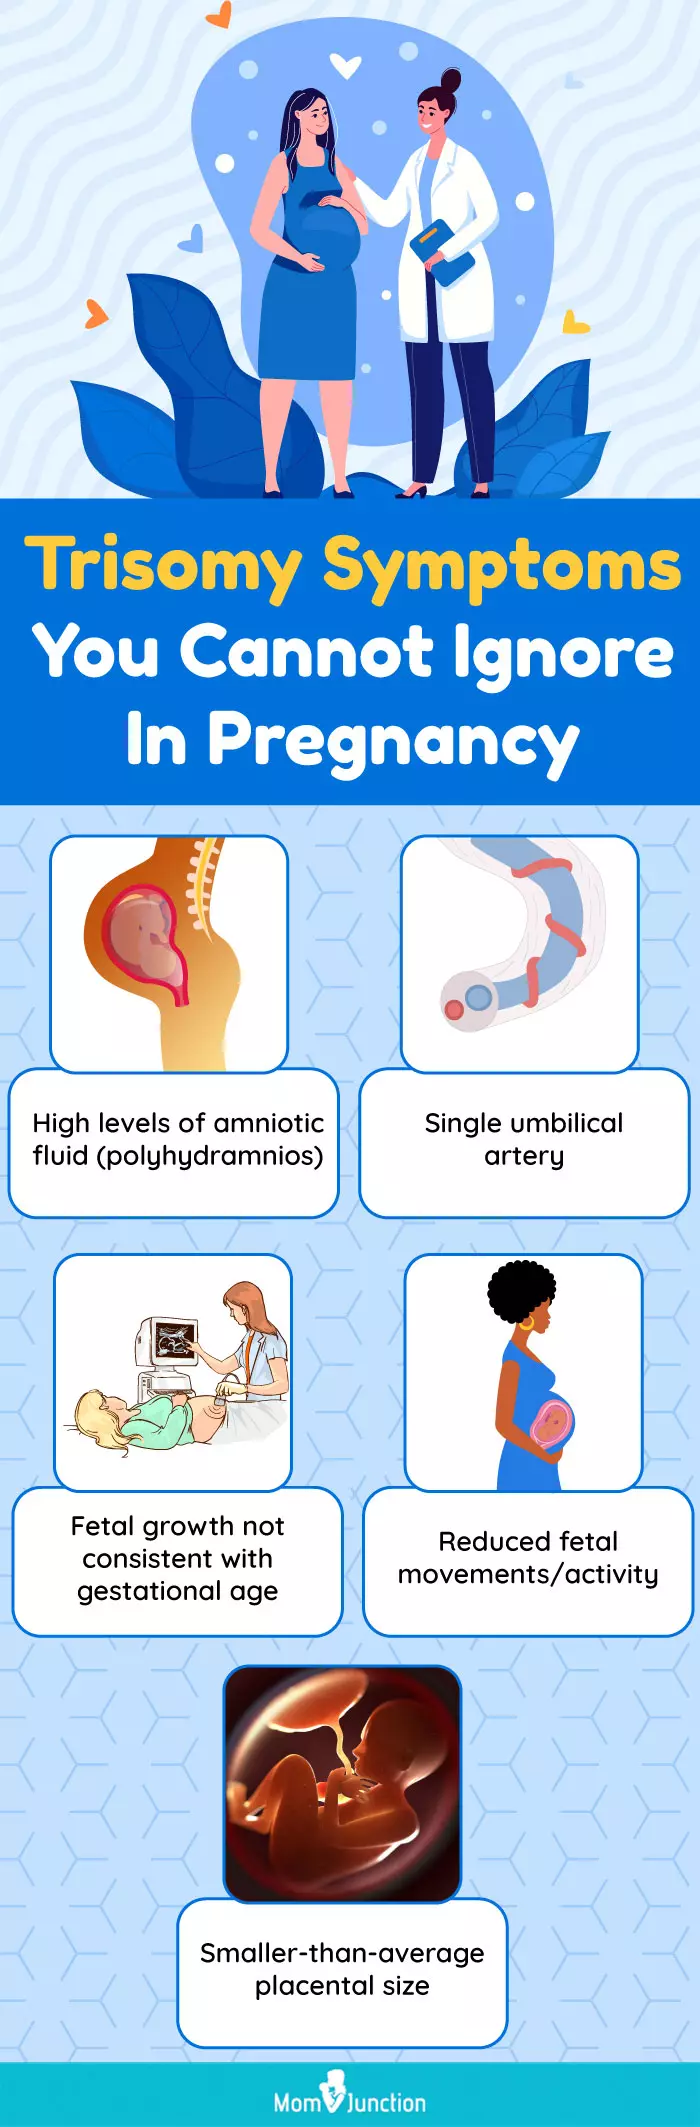 trisomy symptoms you cannot ignore while pregnant (infographic)